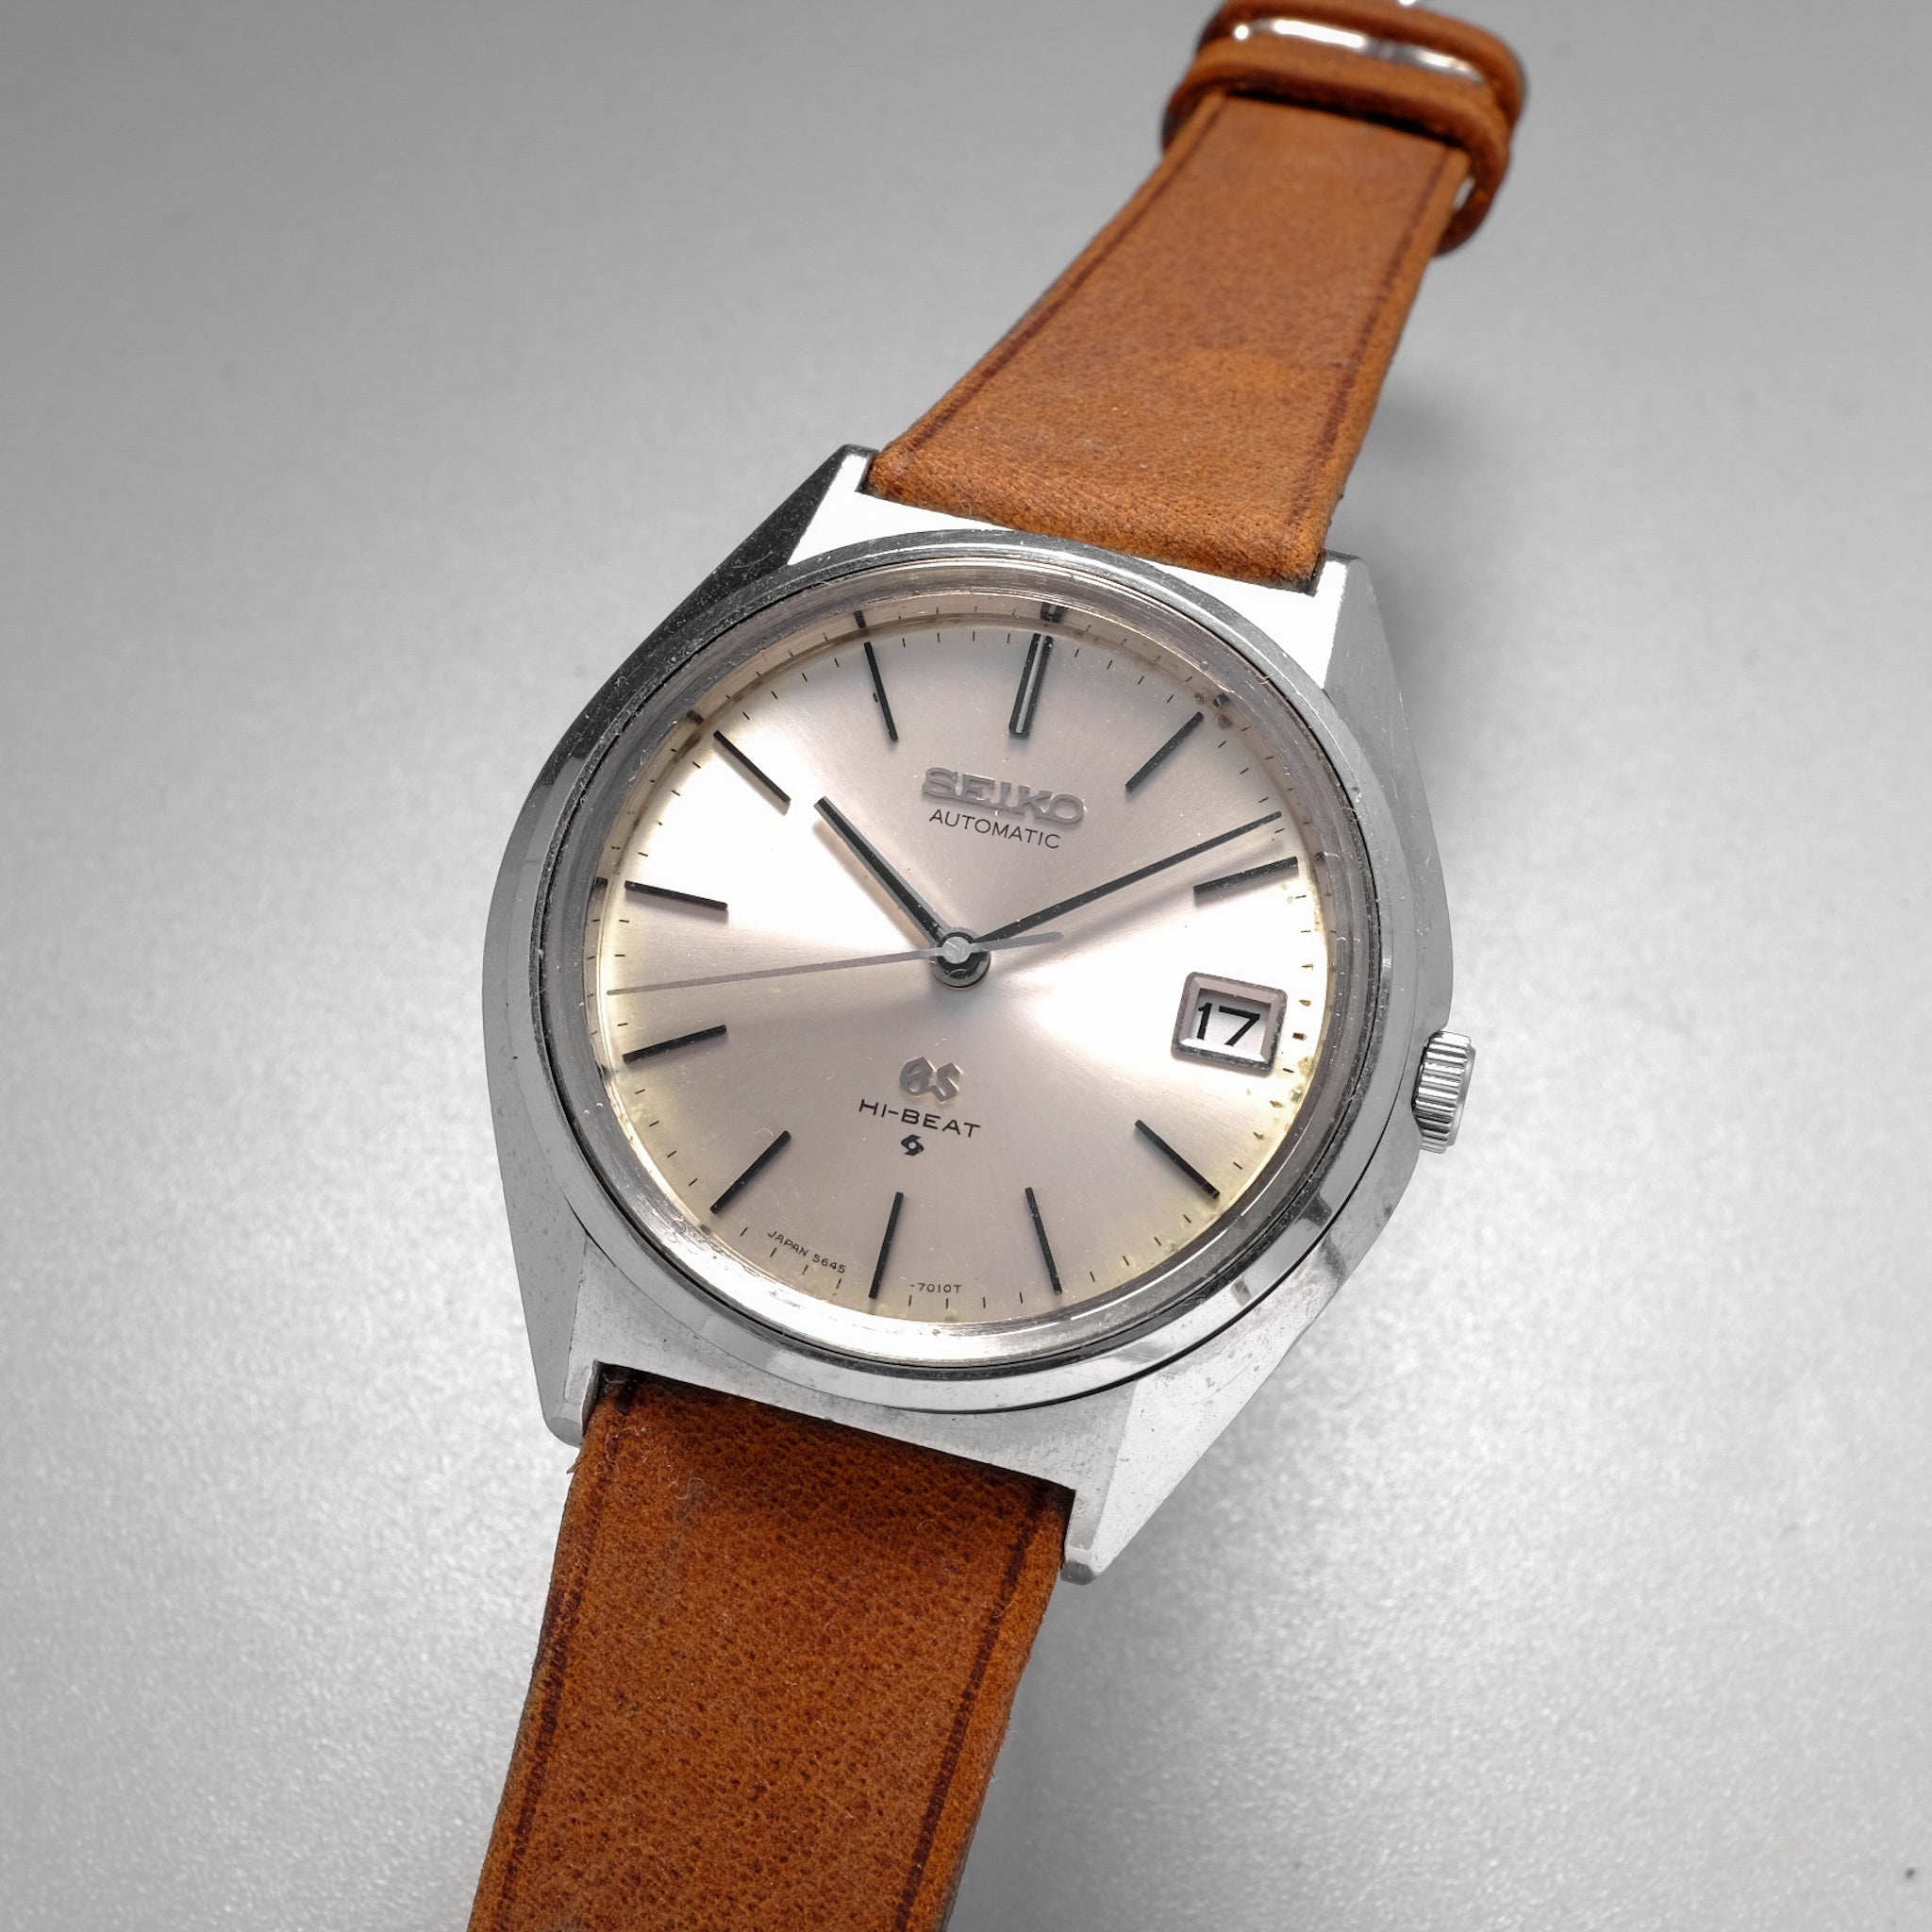 Grand Seiko 5645-7010 from 1971 (Silver Sunburst Dial Variant)